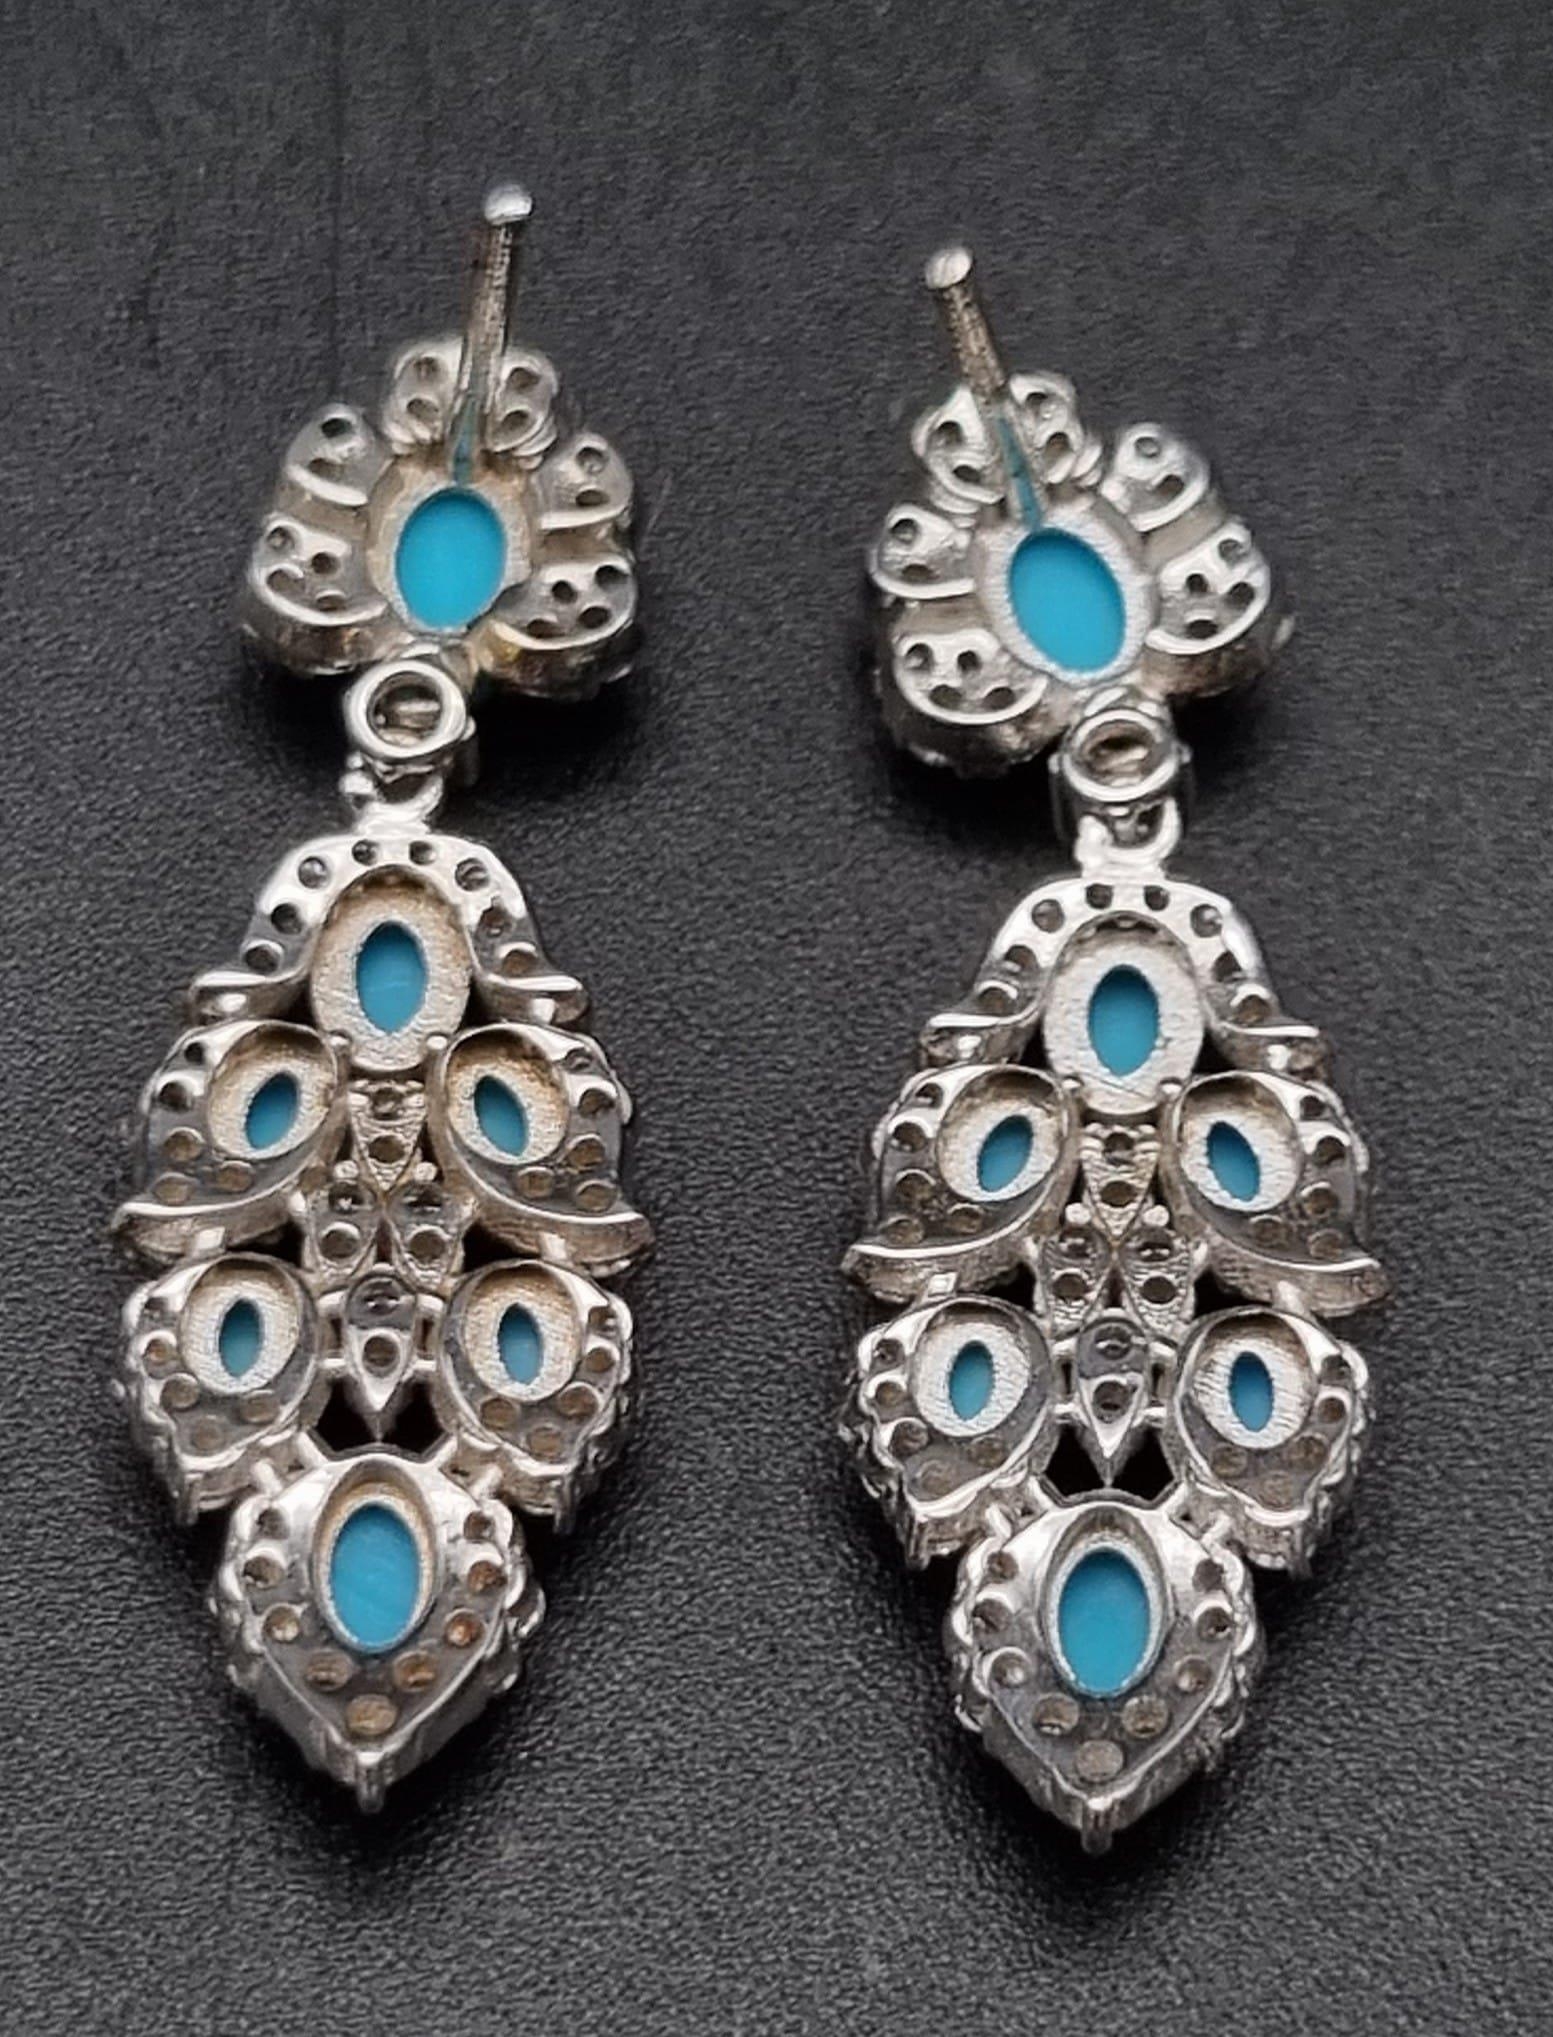 A Pair of Vintage 18K White Gold Diamond and Turquoise Earrings. A turquoise cabochon surrounded - Image 2 of 3